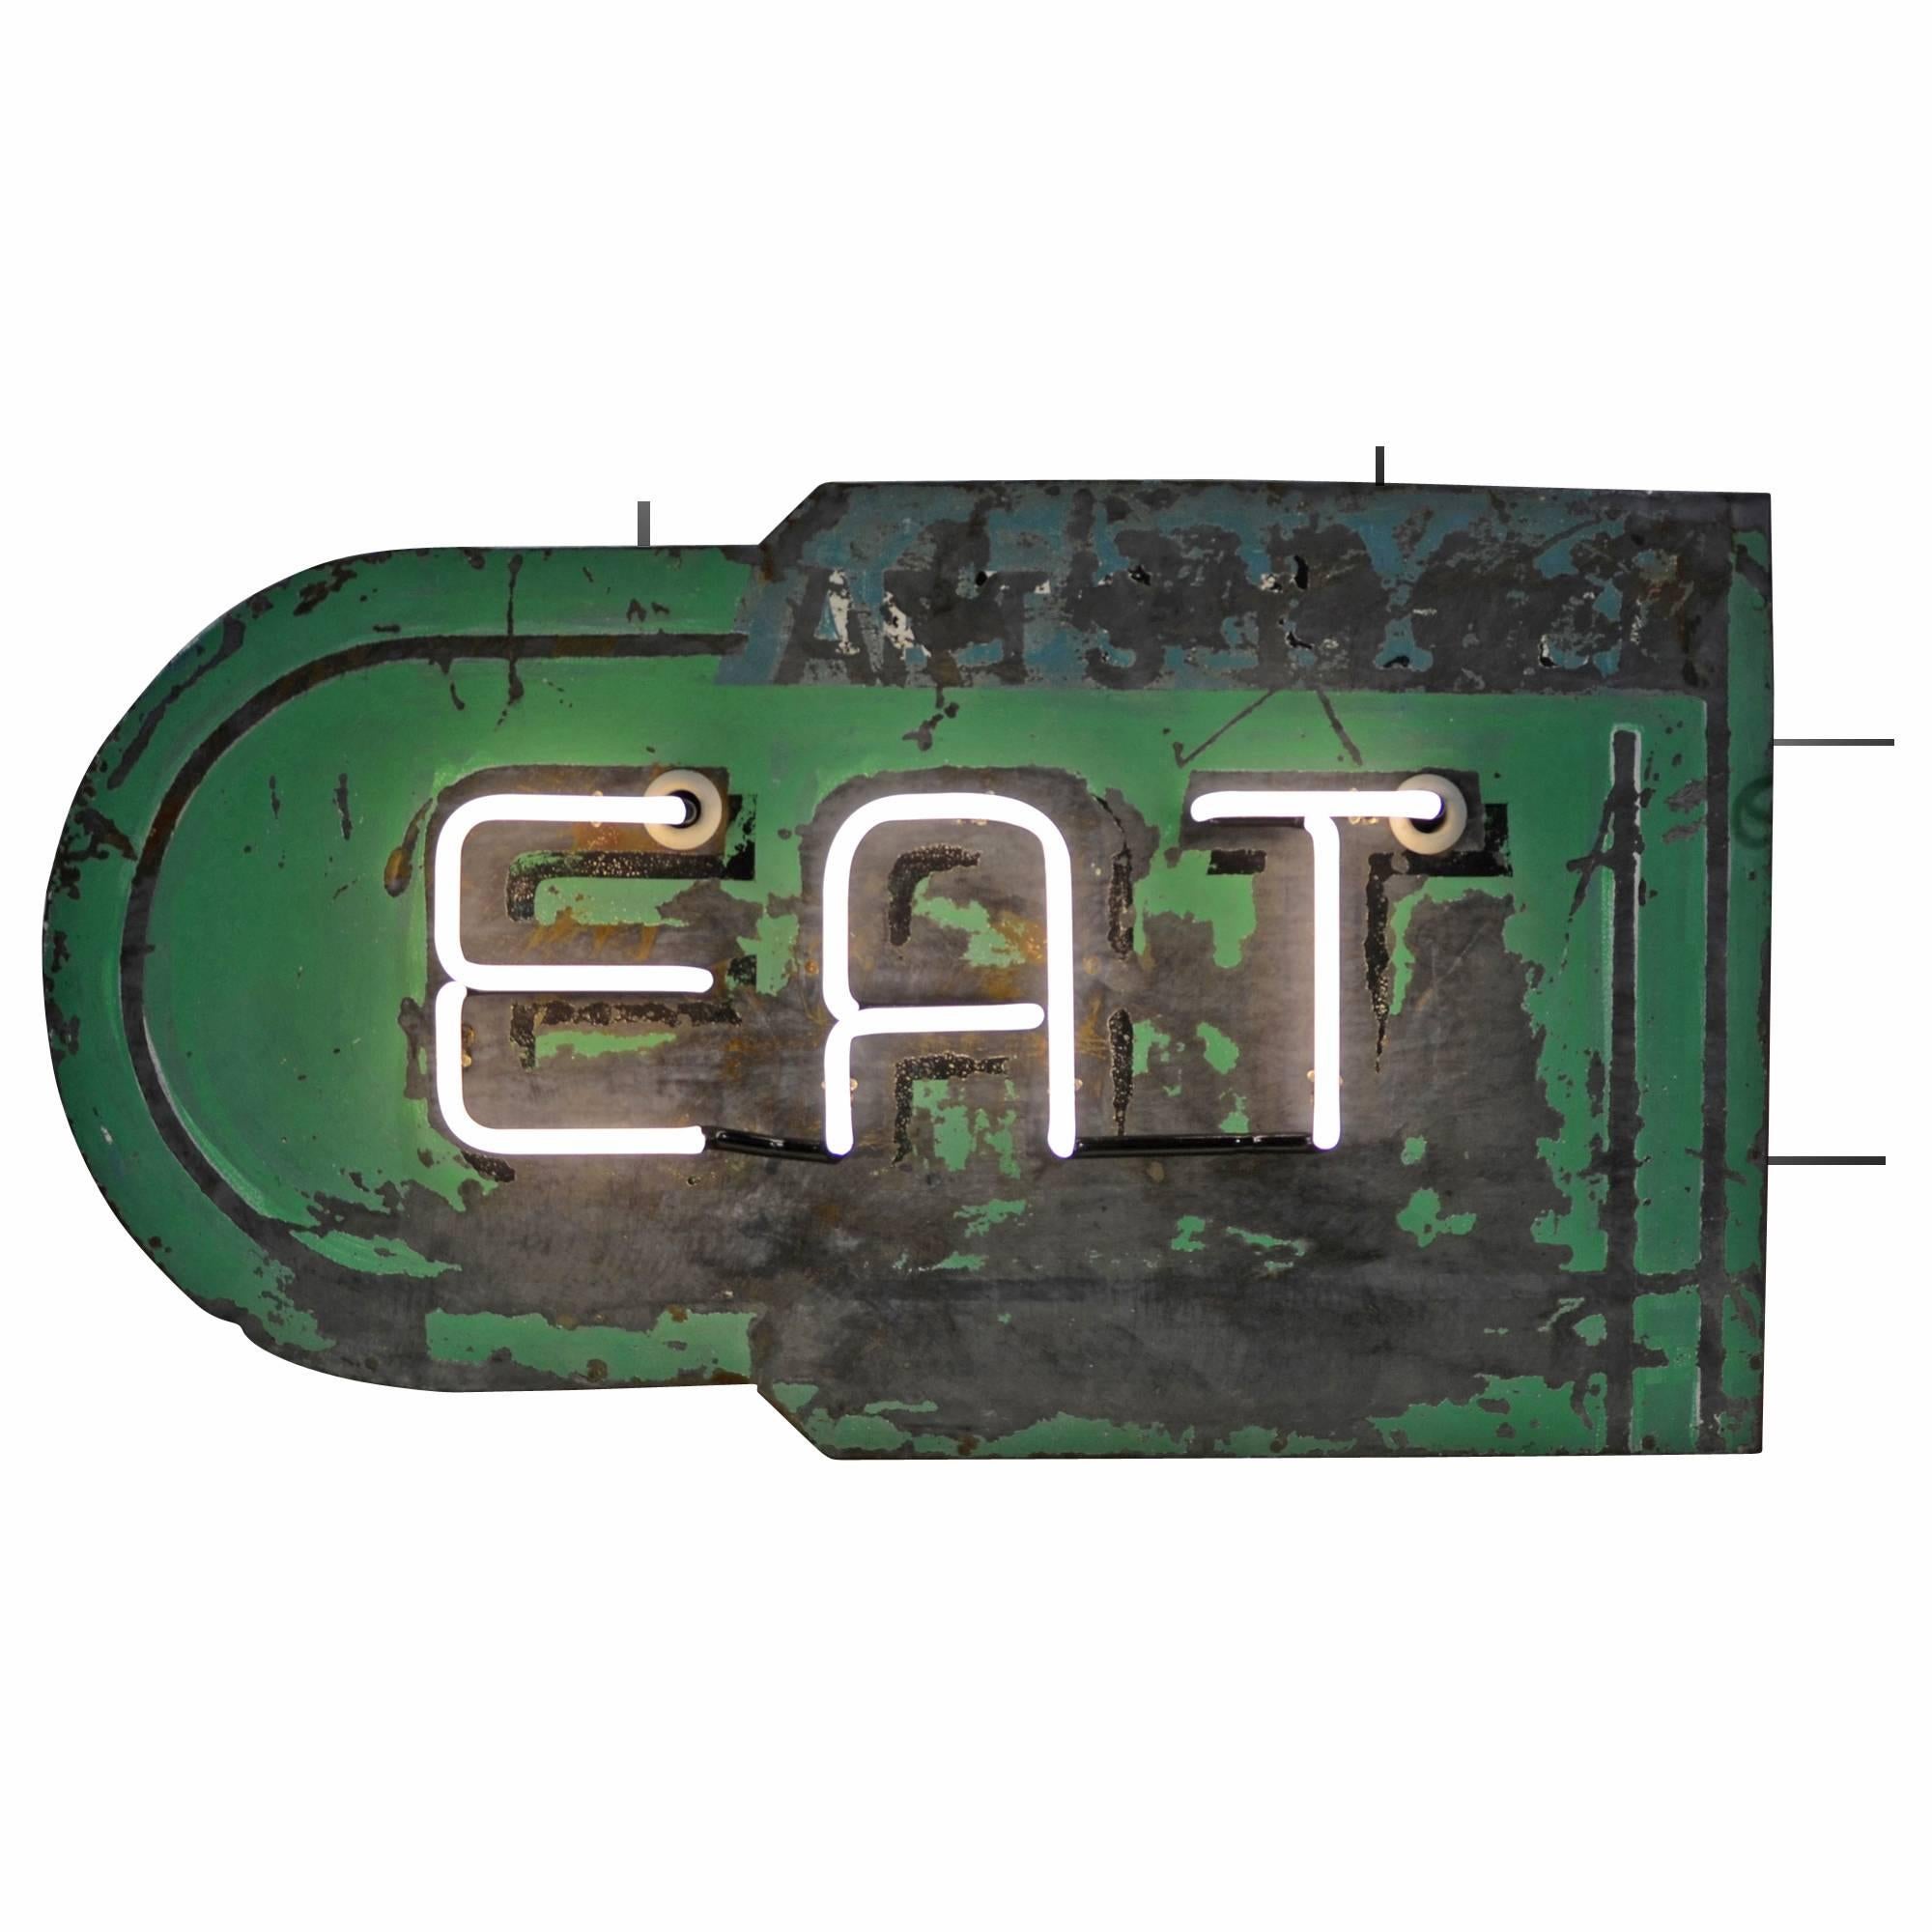 Double-Sided Neon Eat Sign, circa 1930s